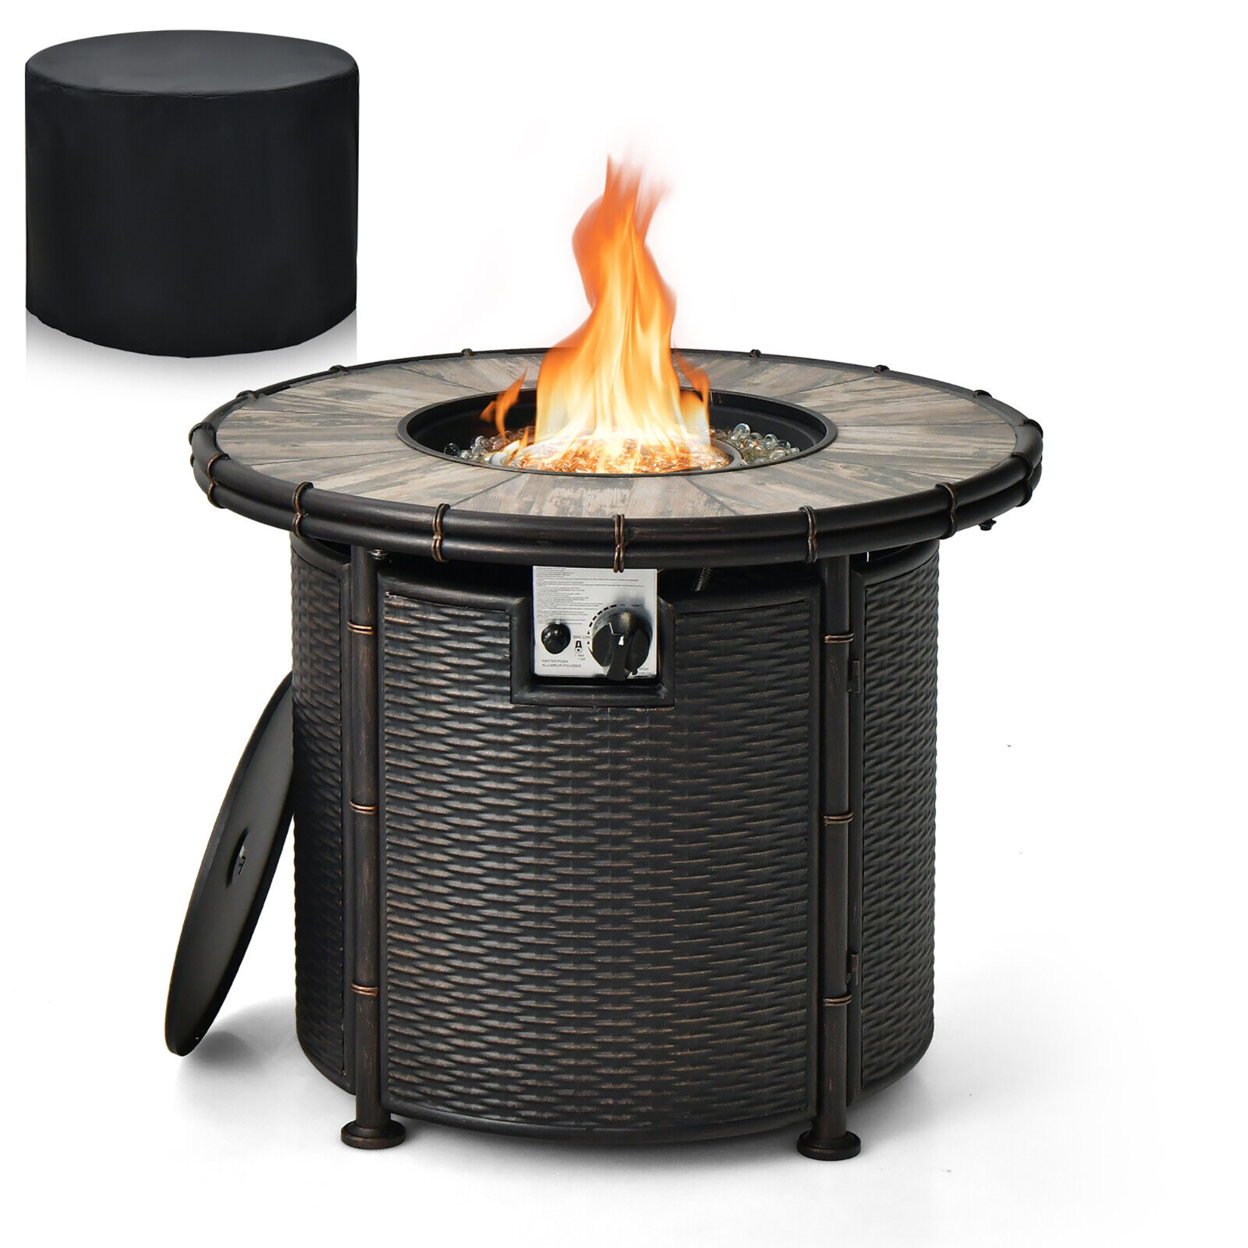 32'' Round Fire Pit Table 30,000 BTU Propane Gas Firepit W/ Fire Glasses& Cover